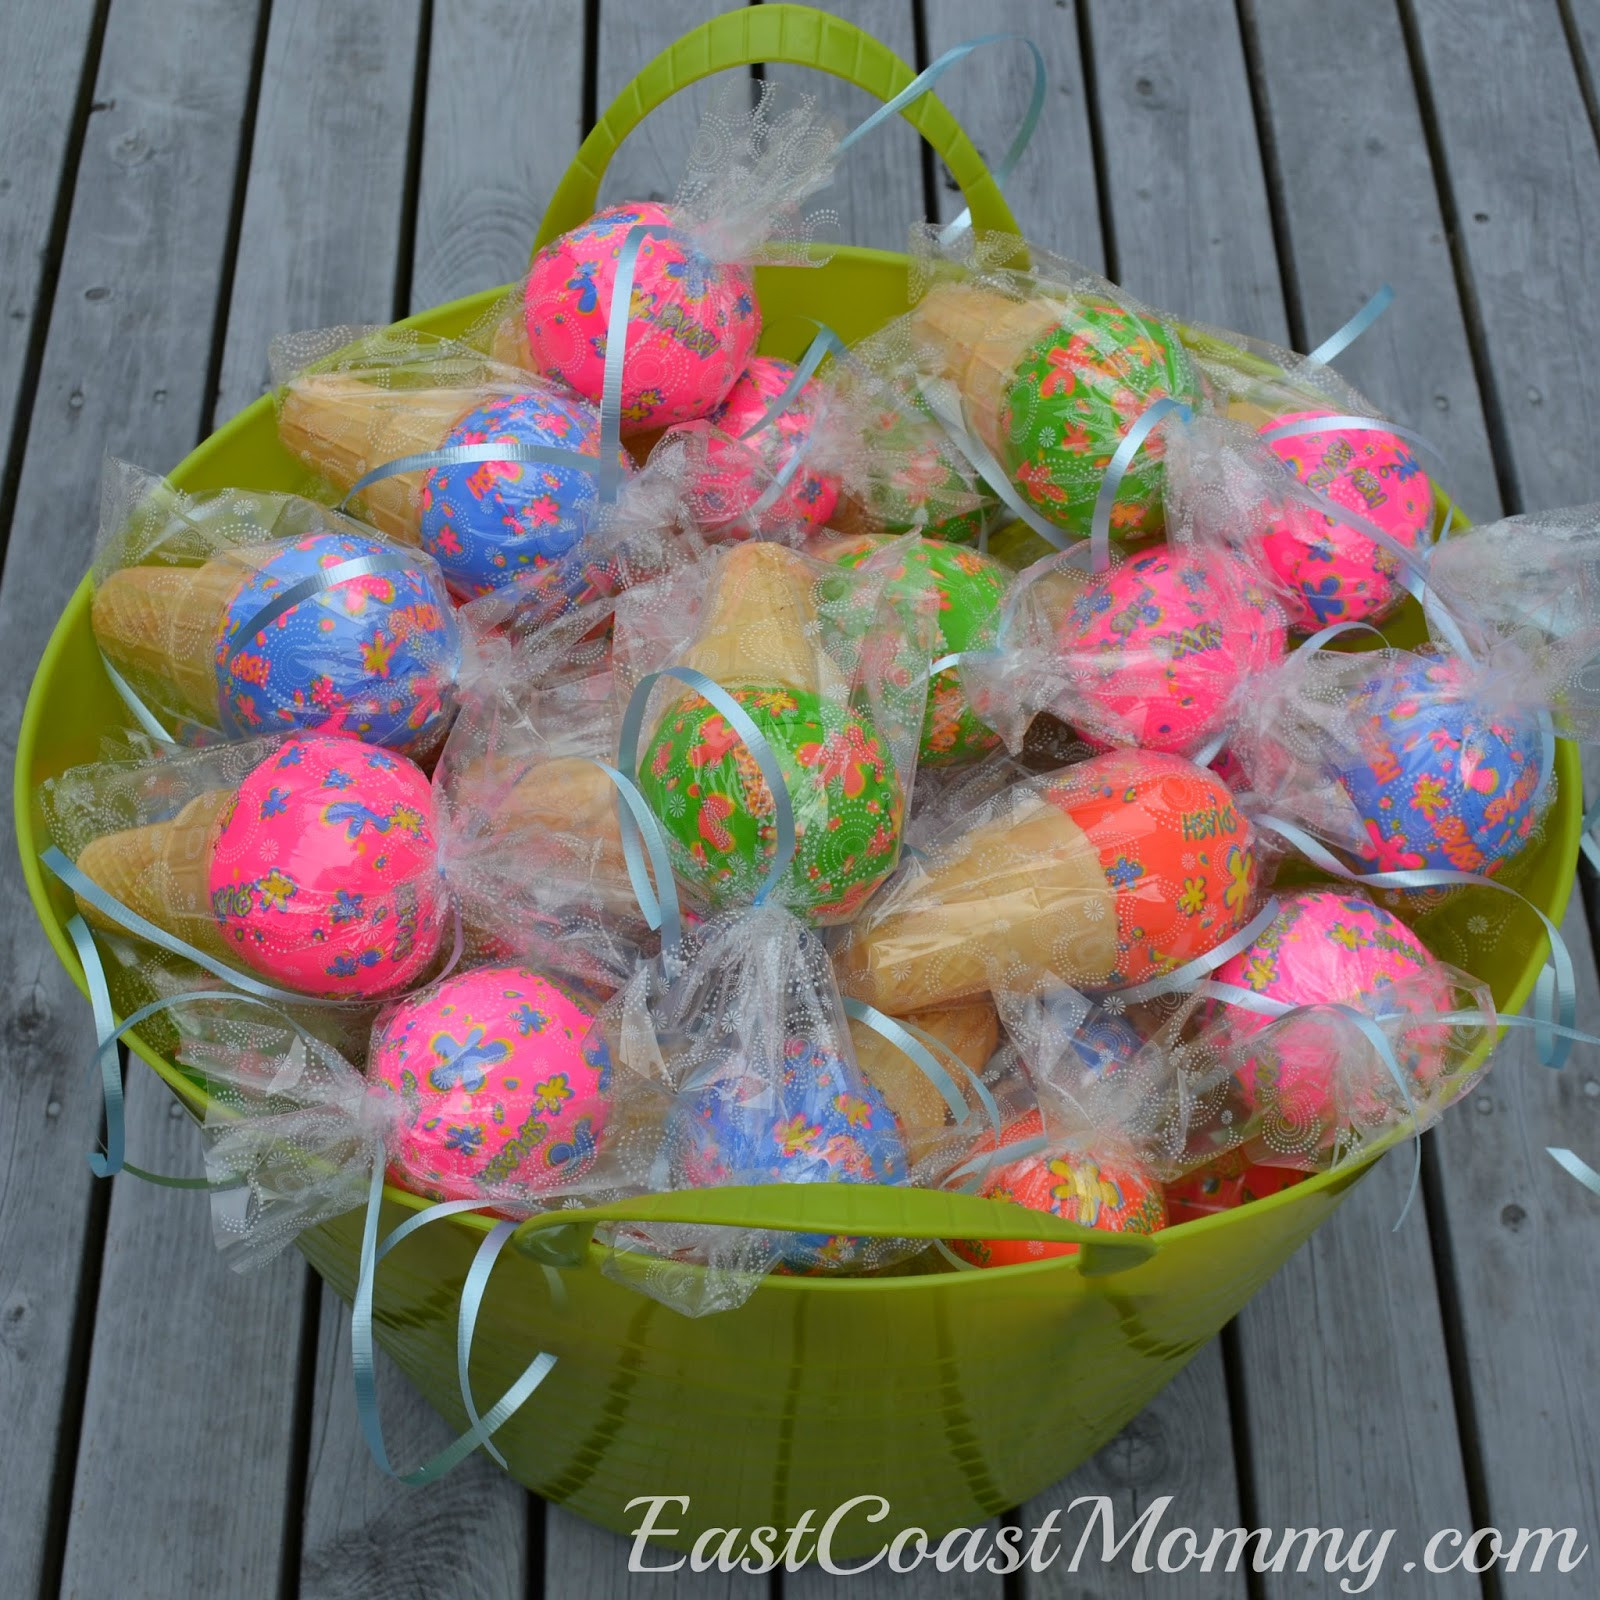 Pool Party Goodie Bag Ideas
 East Coast Mommy Pool party PARTY FAVOR ideas with free